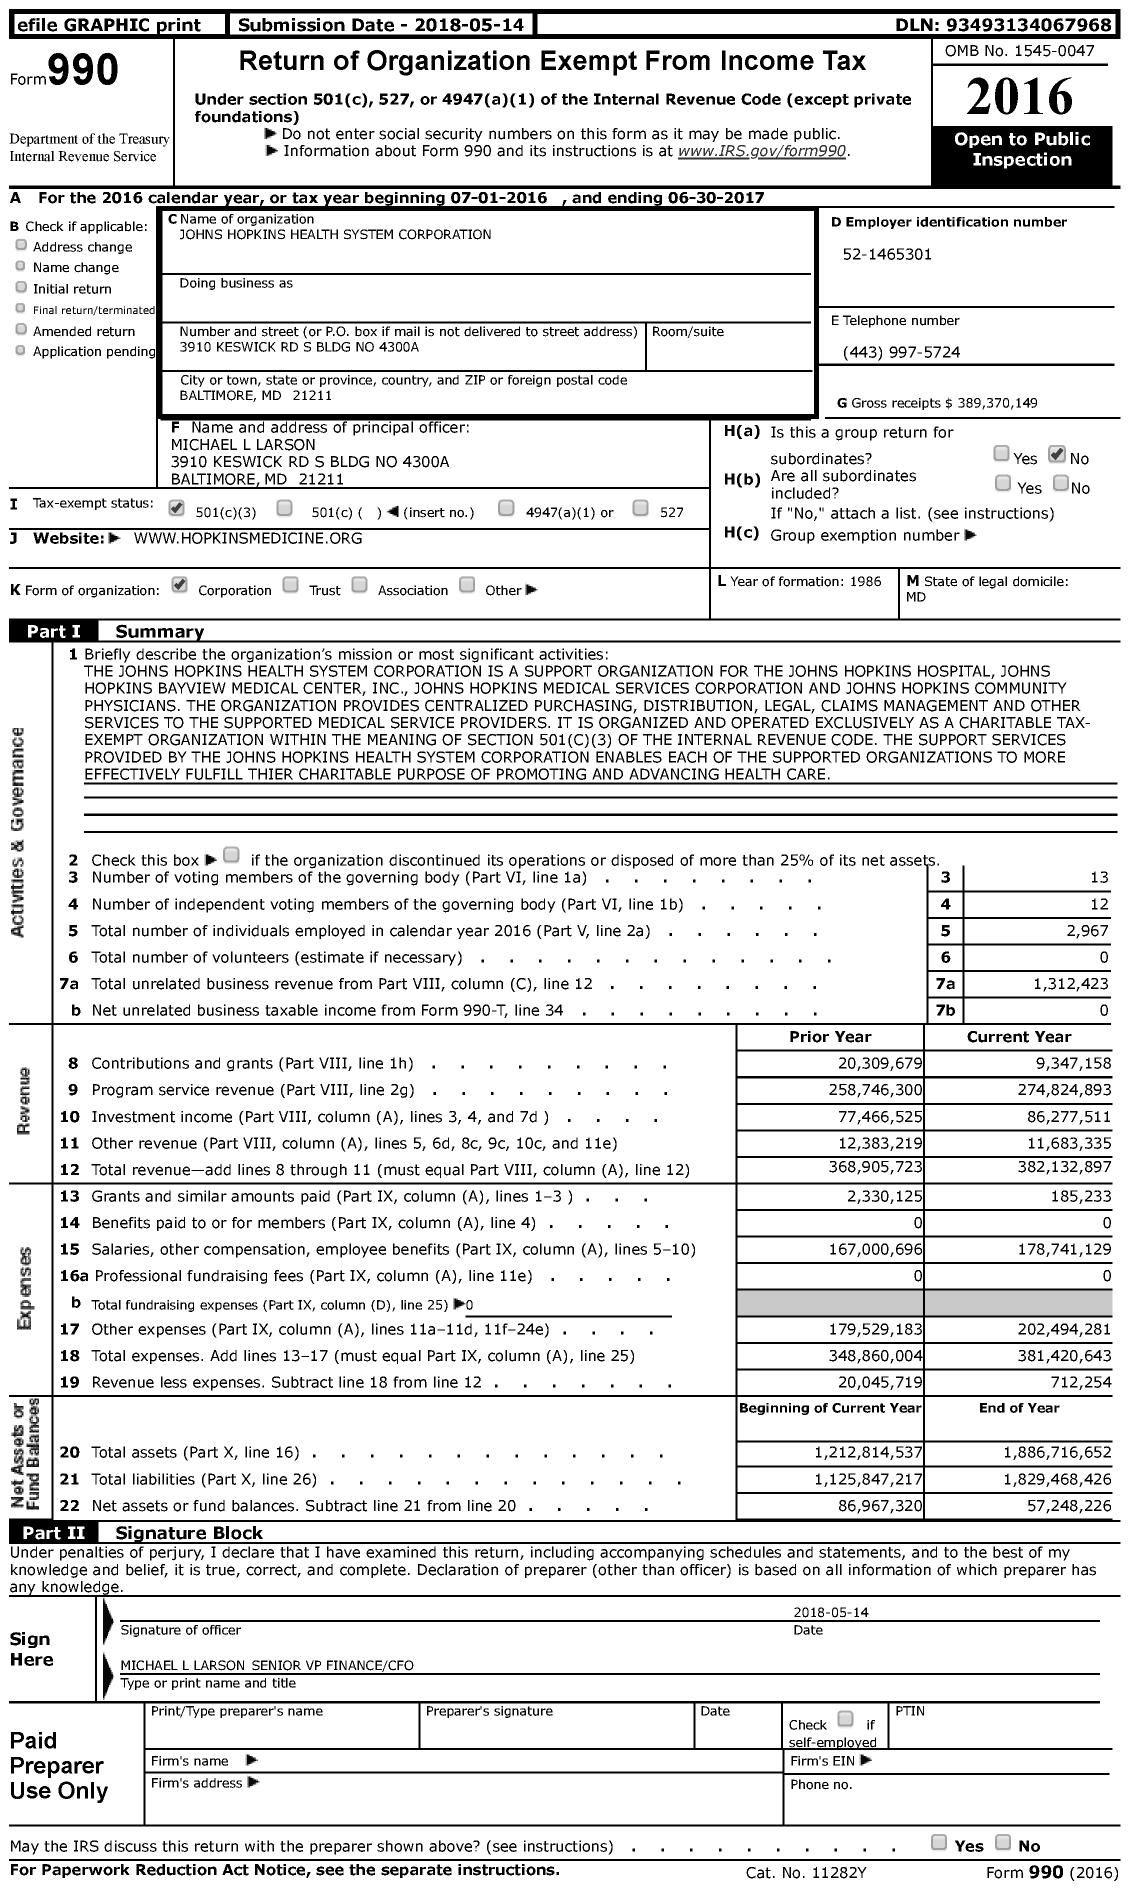 Image of first page of 2016 Form 990 for Johns Hopkins Health System Corporation (JHHS)